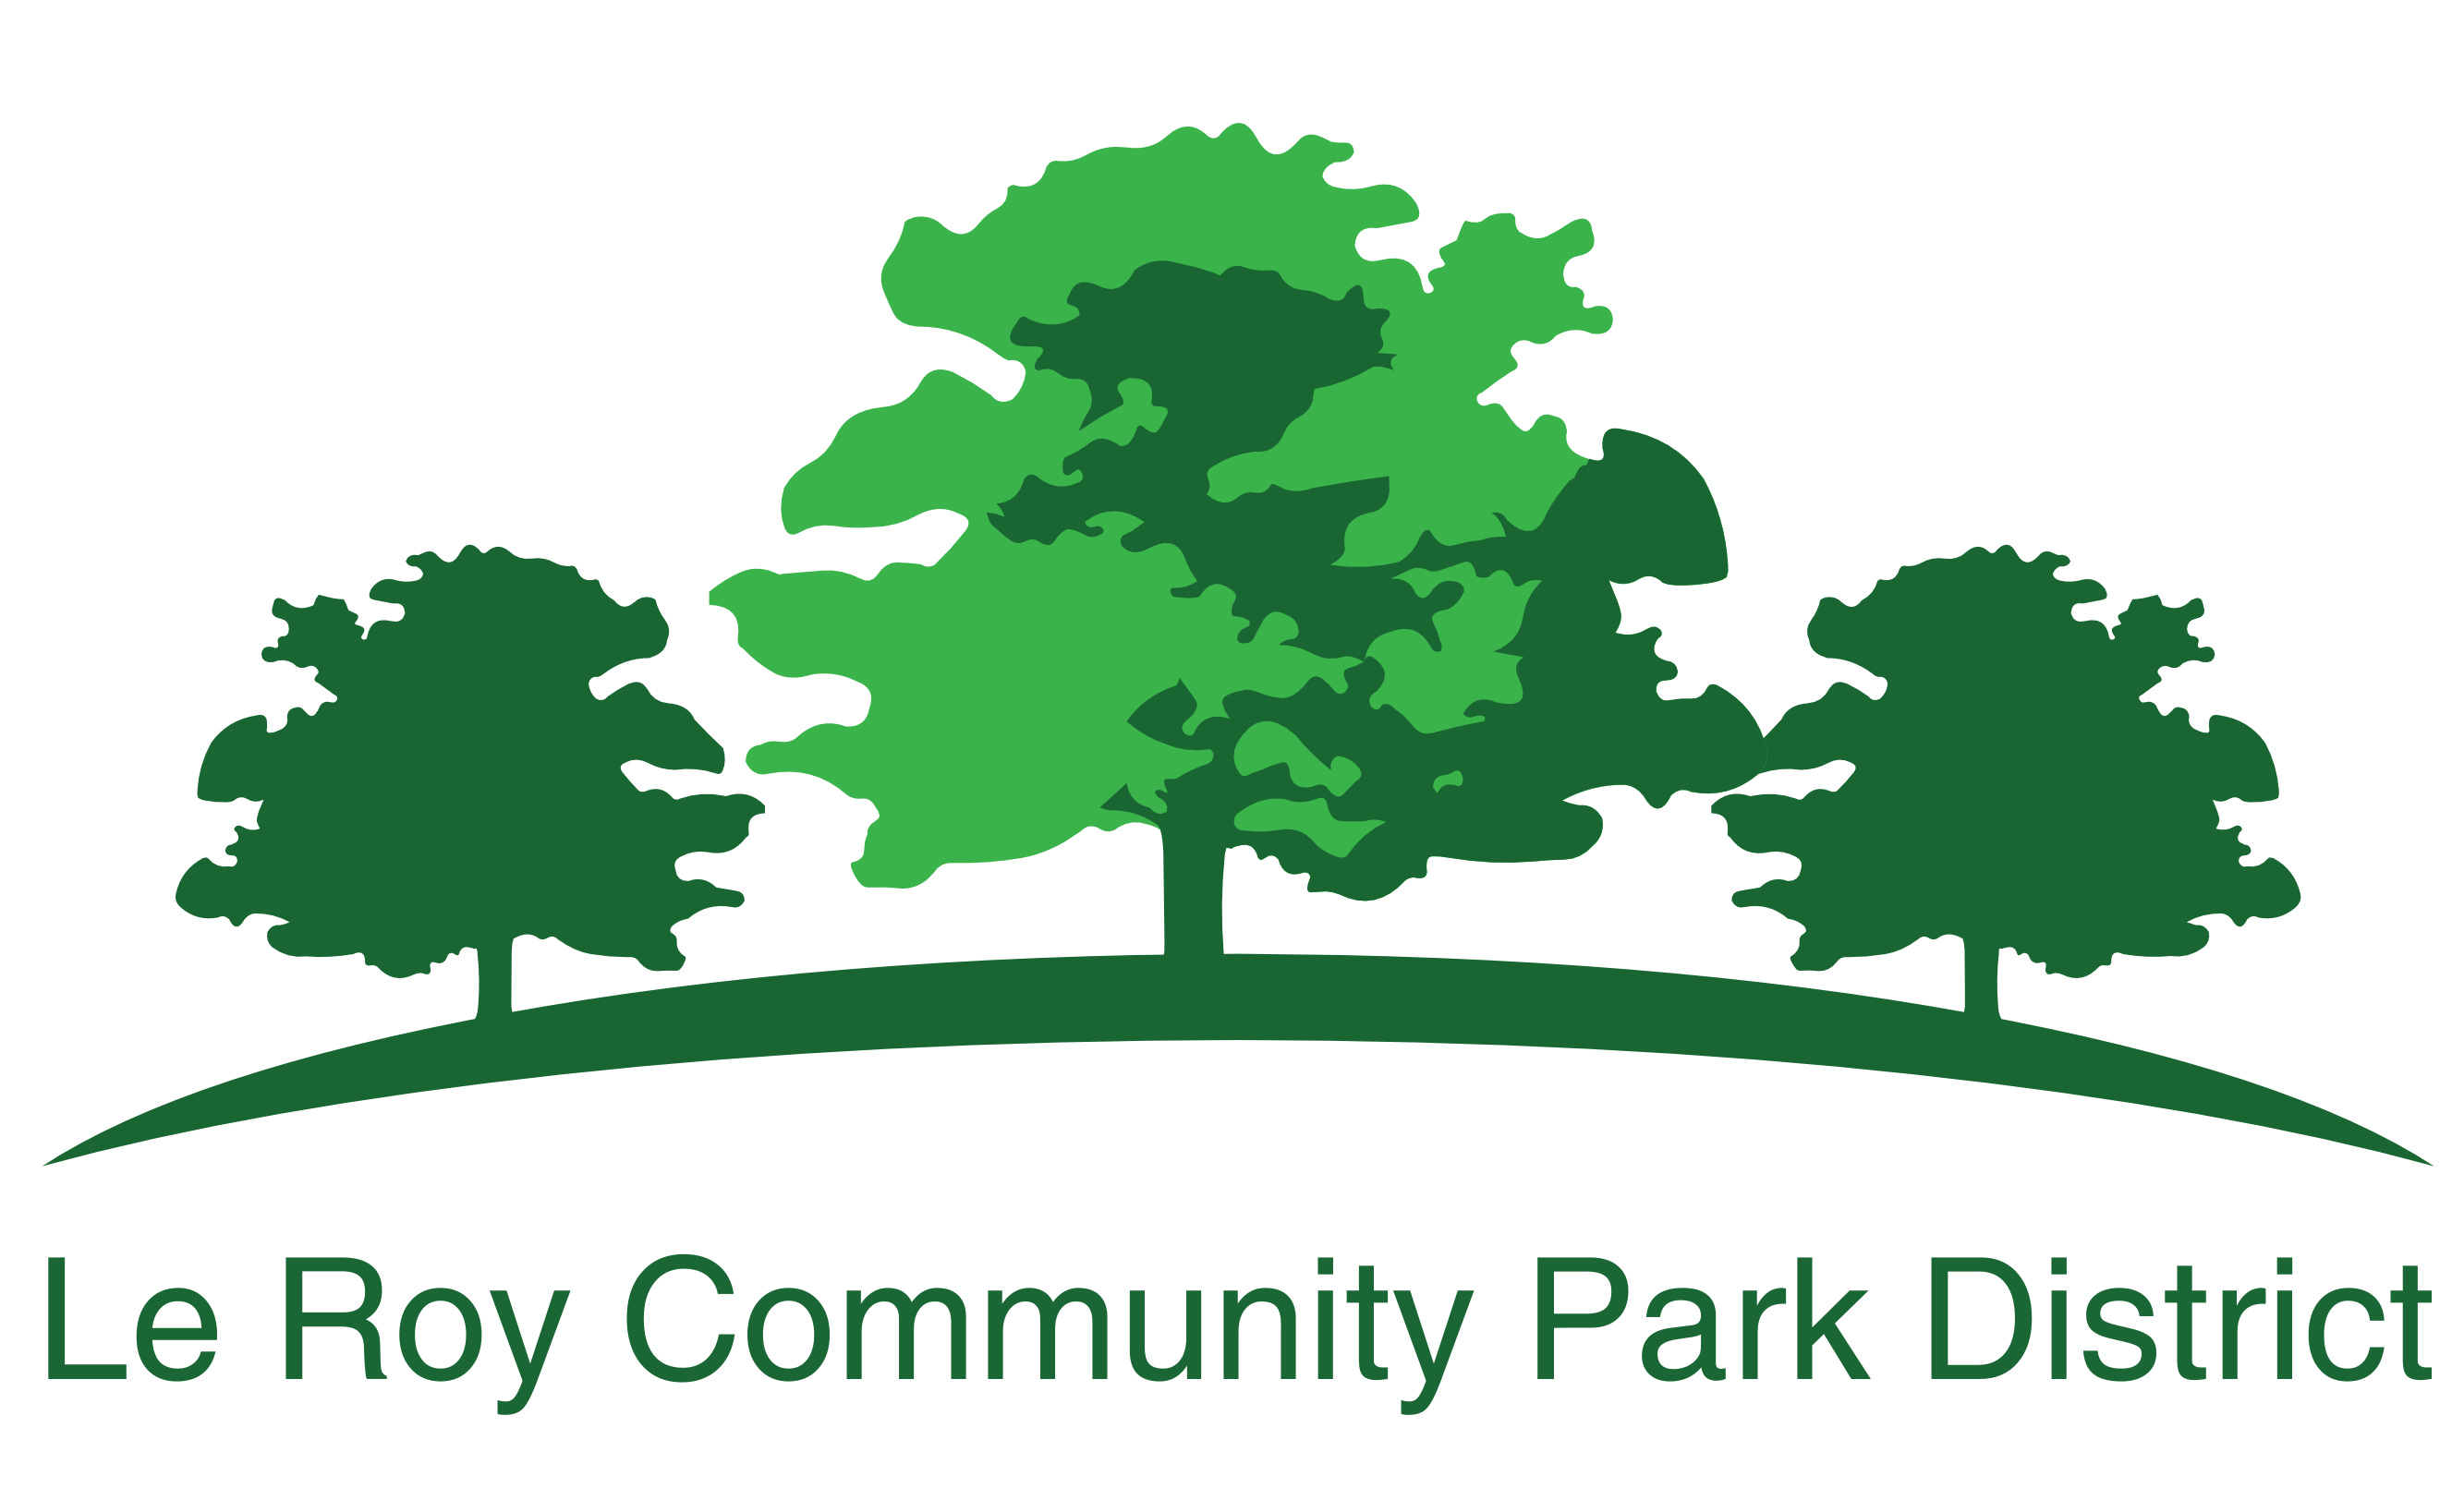 District board of commissioners. Park clipart community park